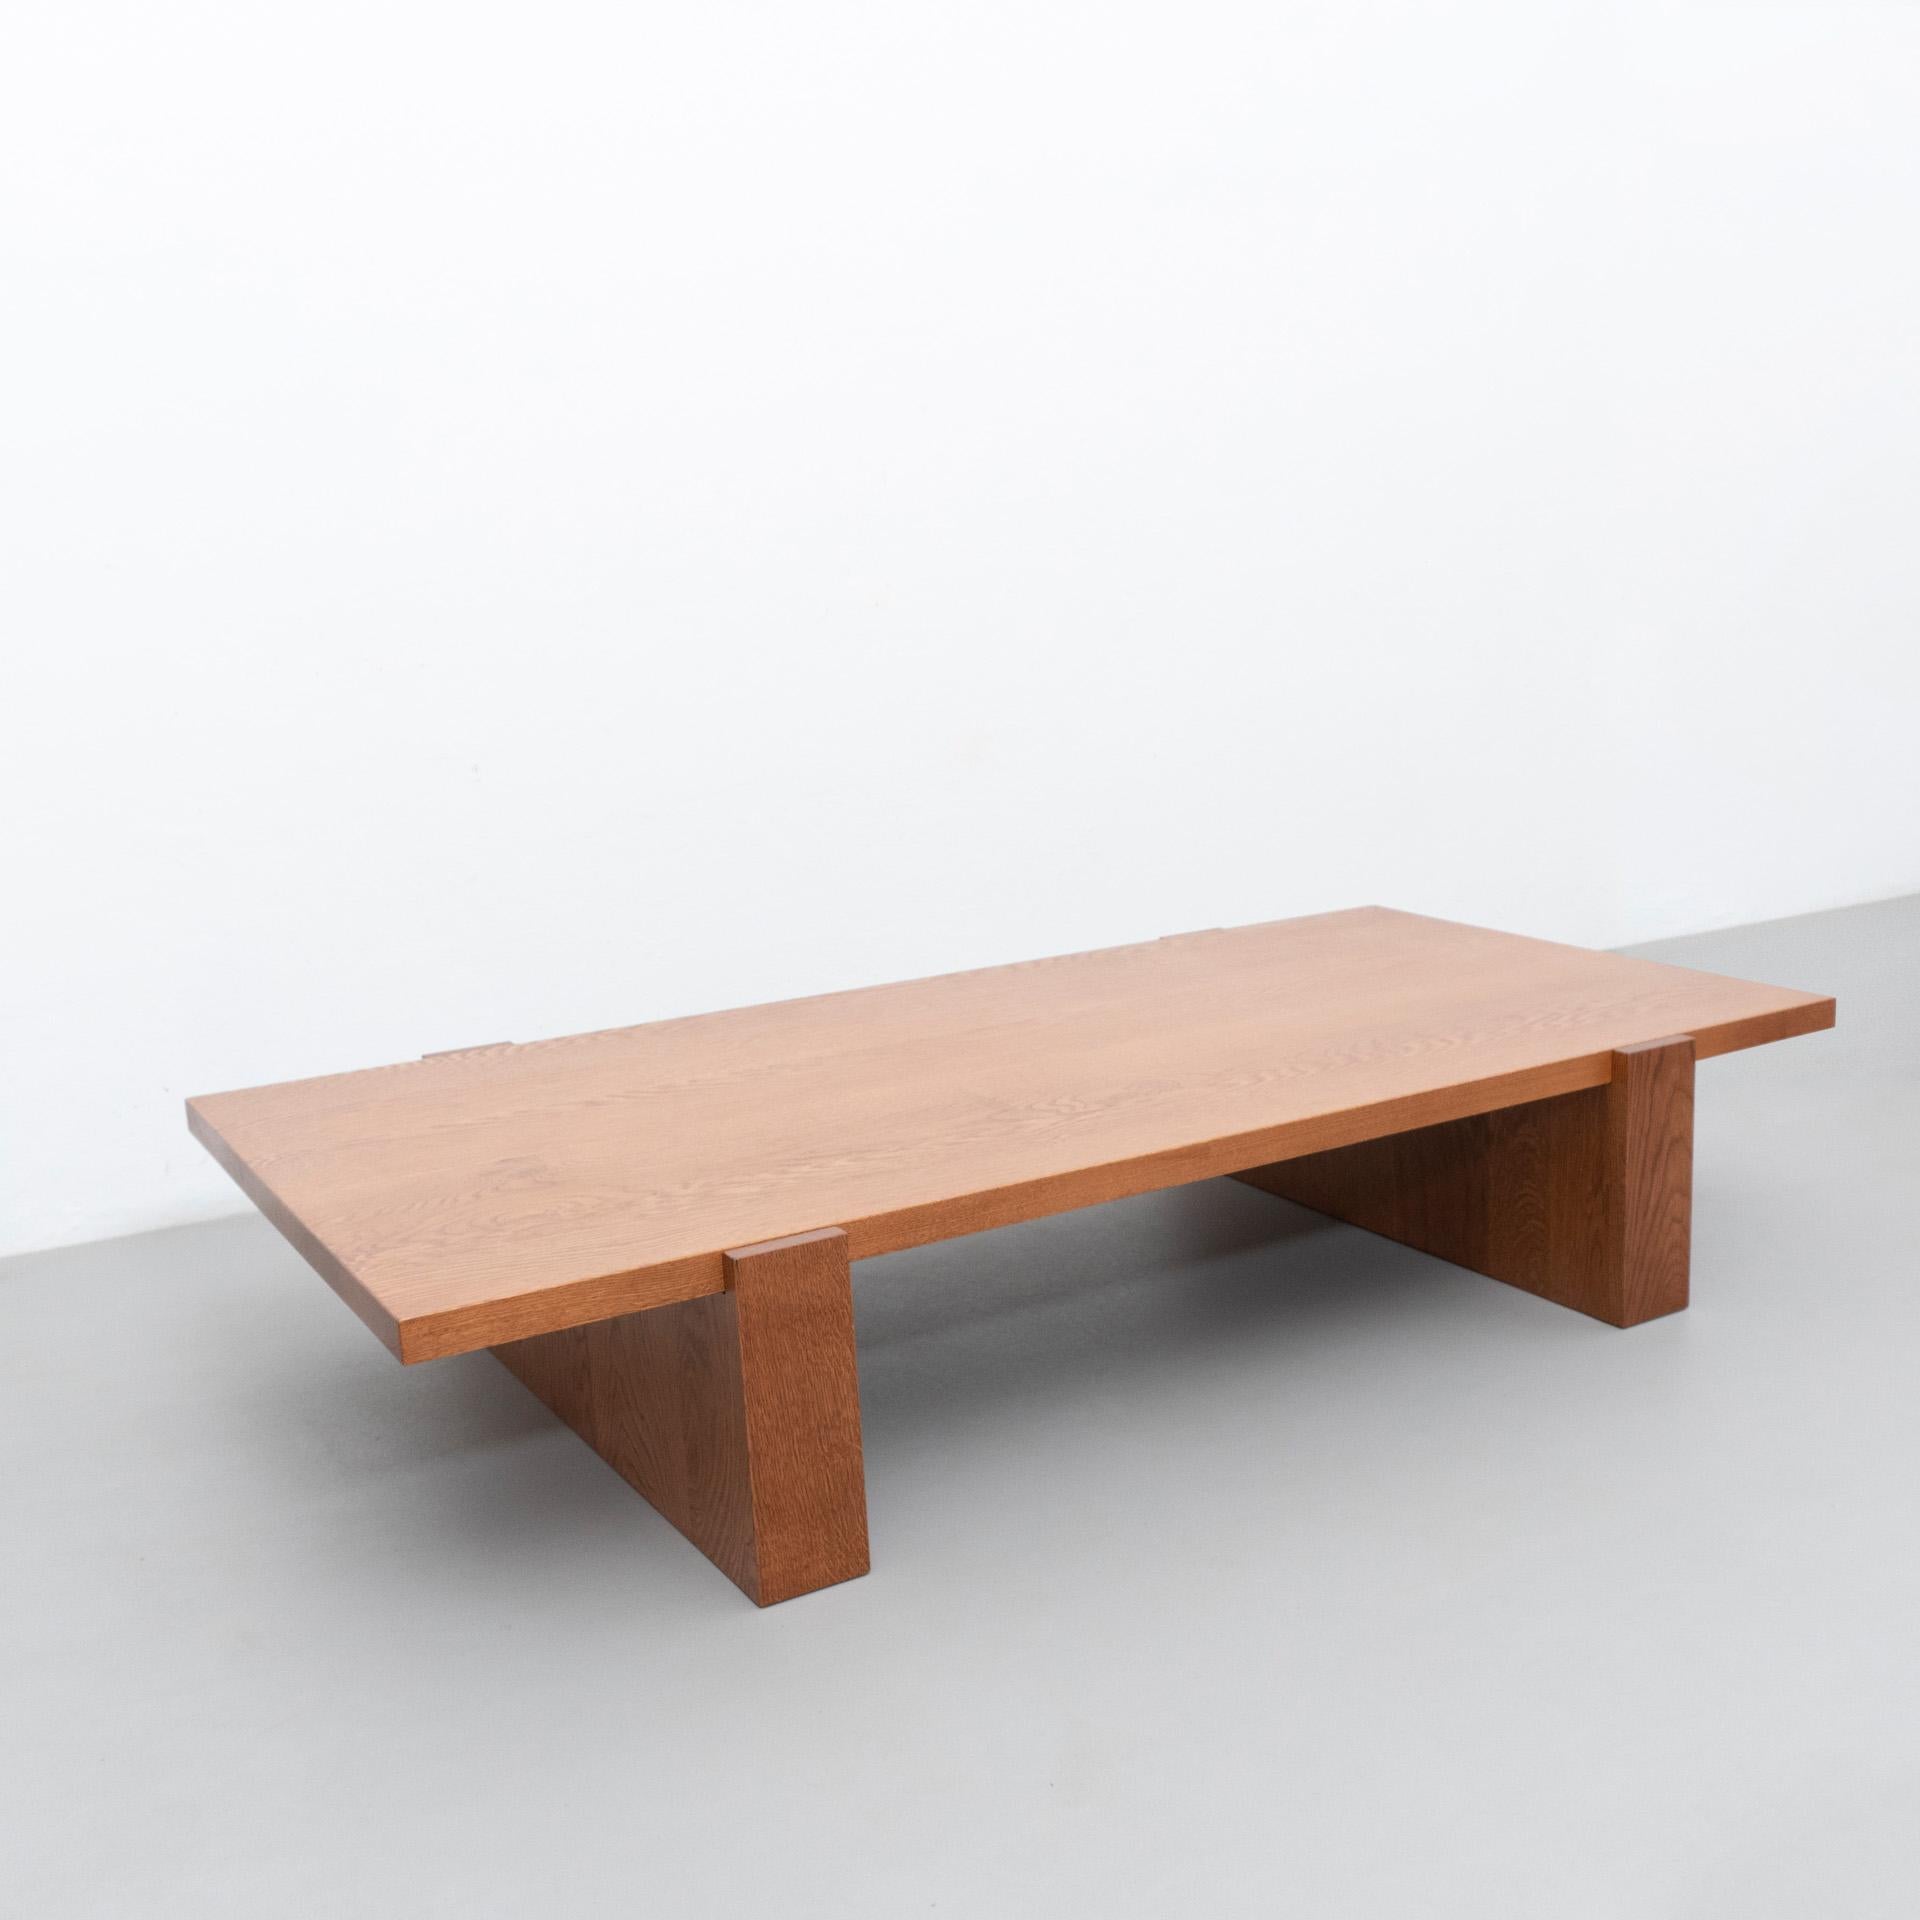 Dada Est. Contemporary Solid Oak Low Table For Sale 7